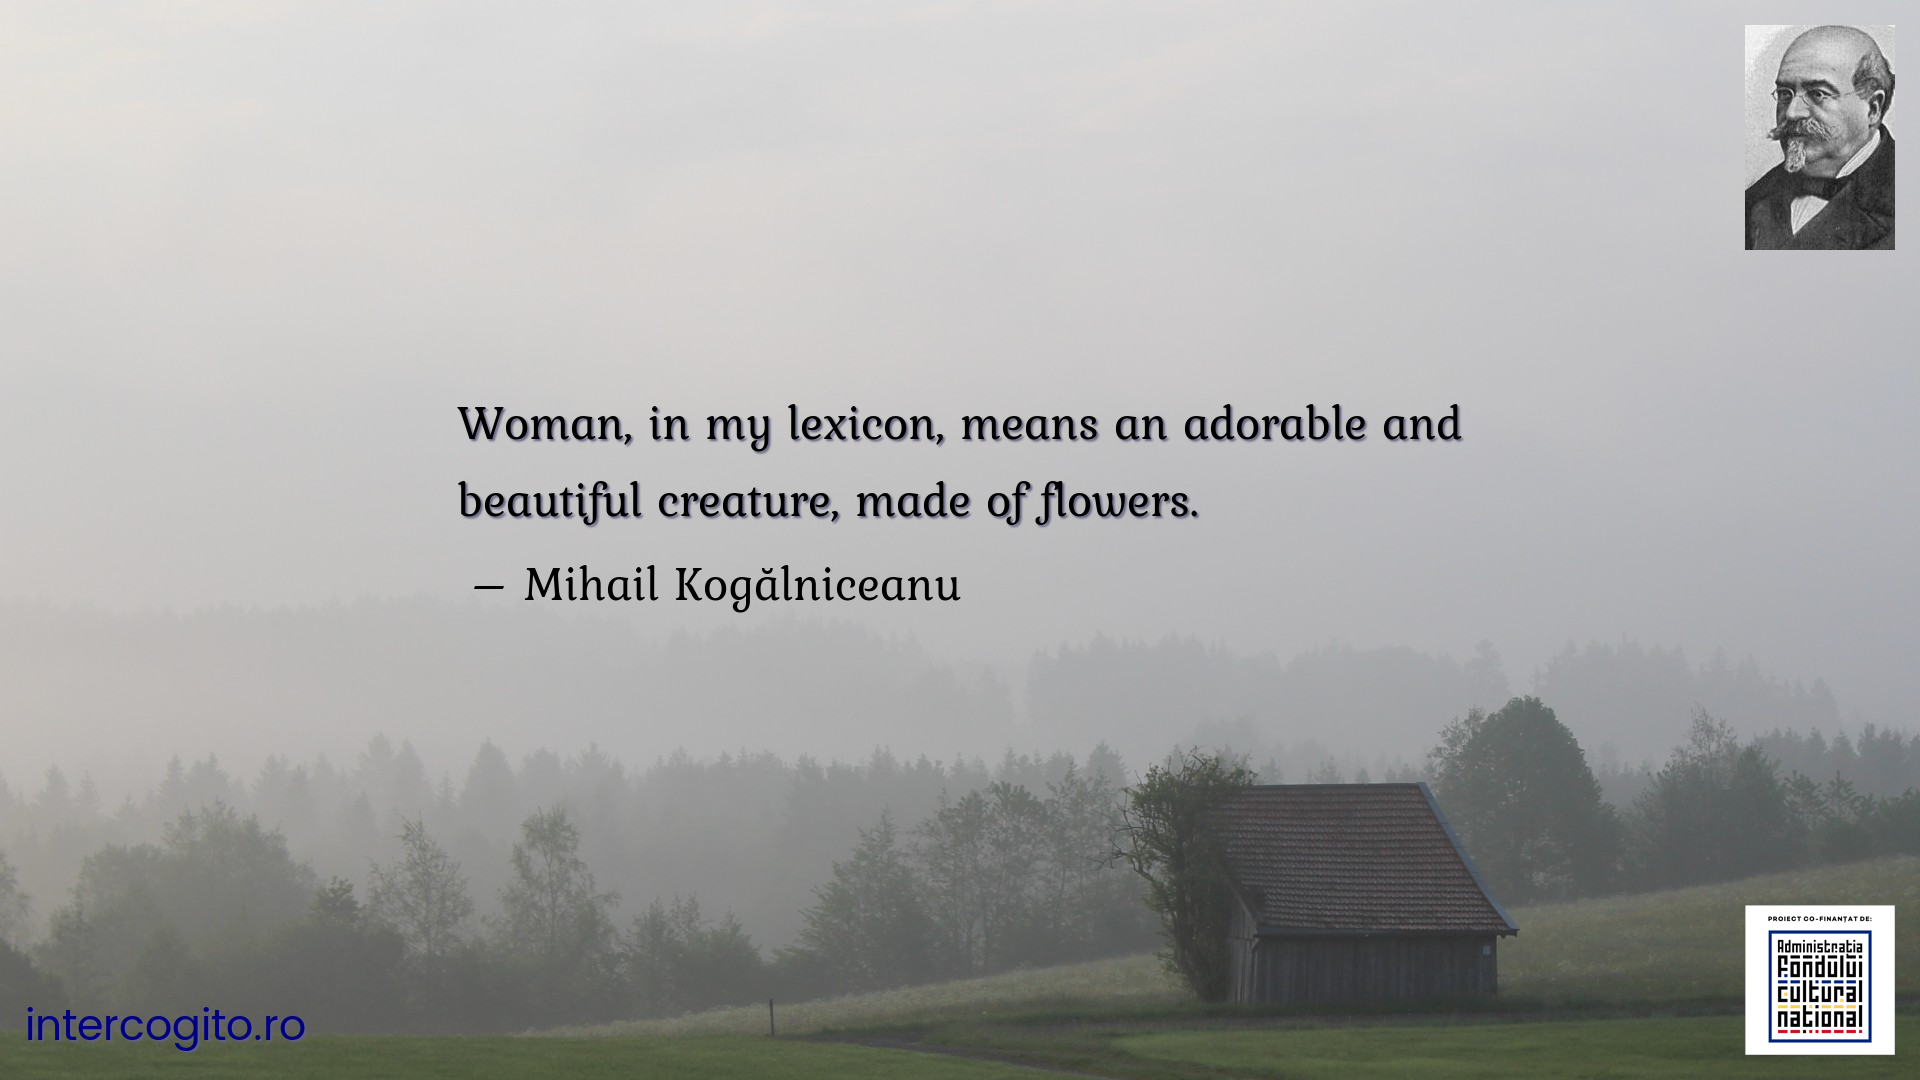 Woman, in my lexicon, means an adorable and beautiful creature, made of flowers.